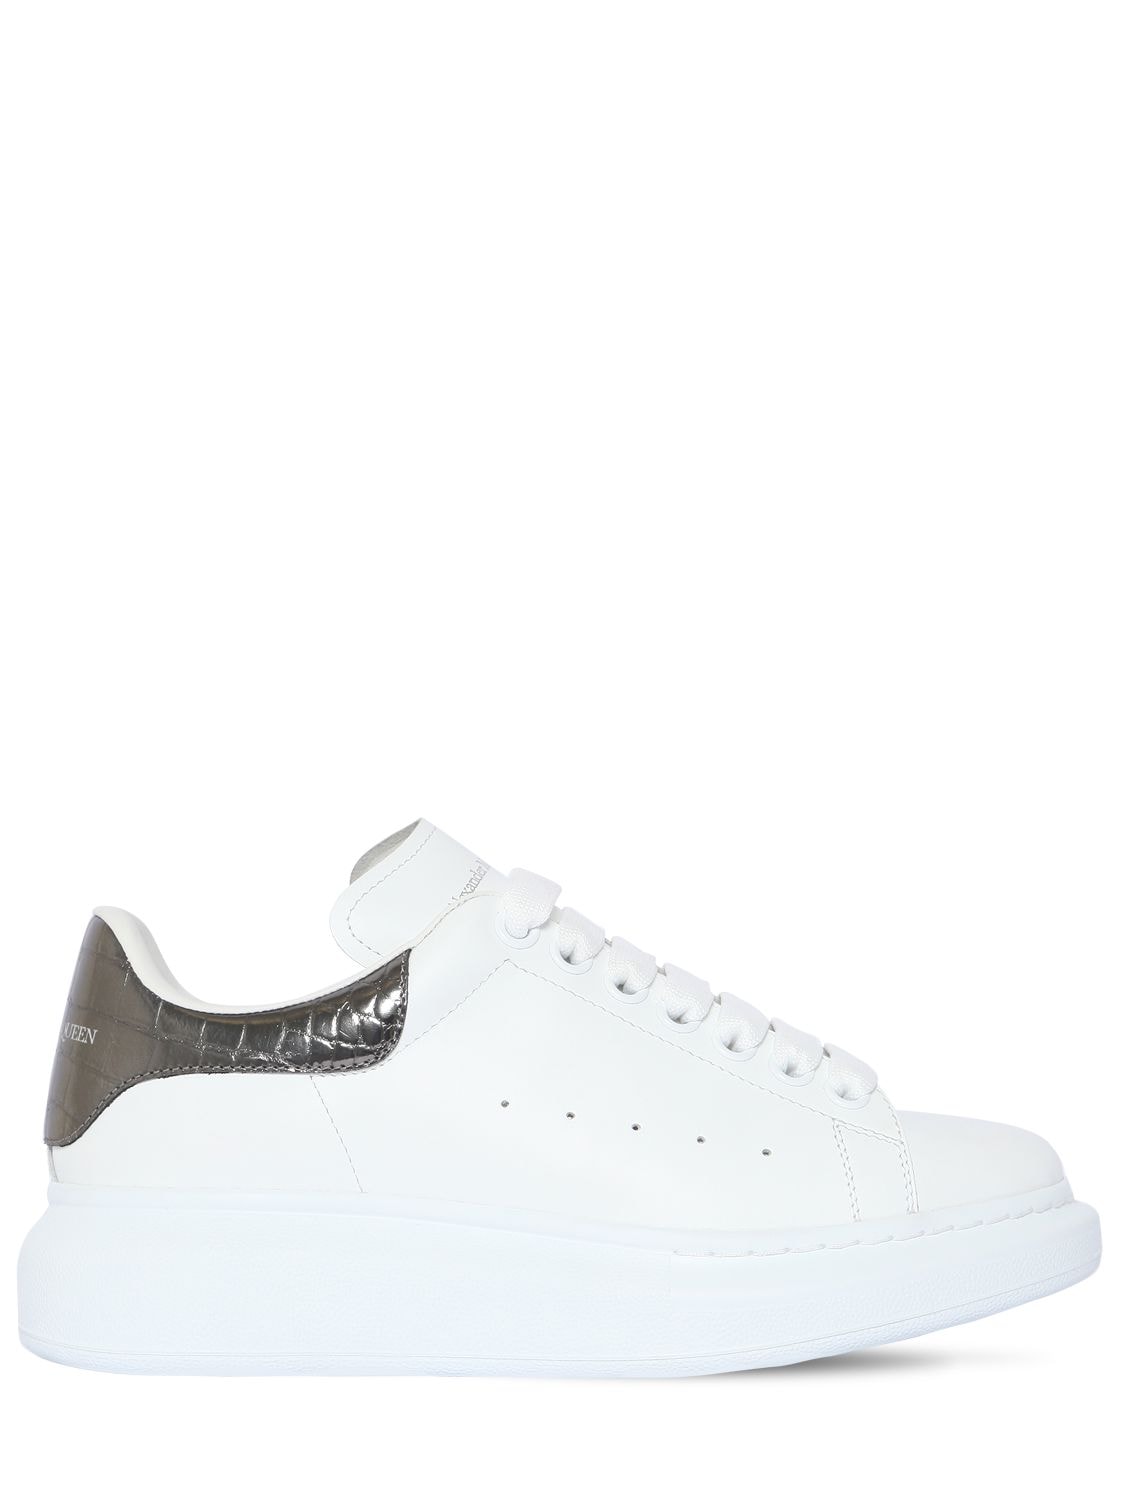 Alexander Mcqueen 45mm Croc Embossed Leather Sneakers In White,silver